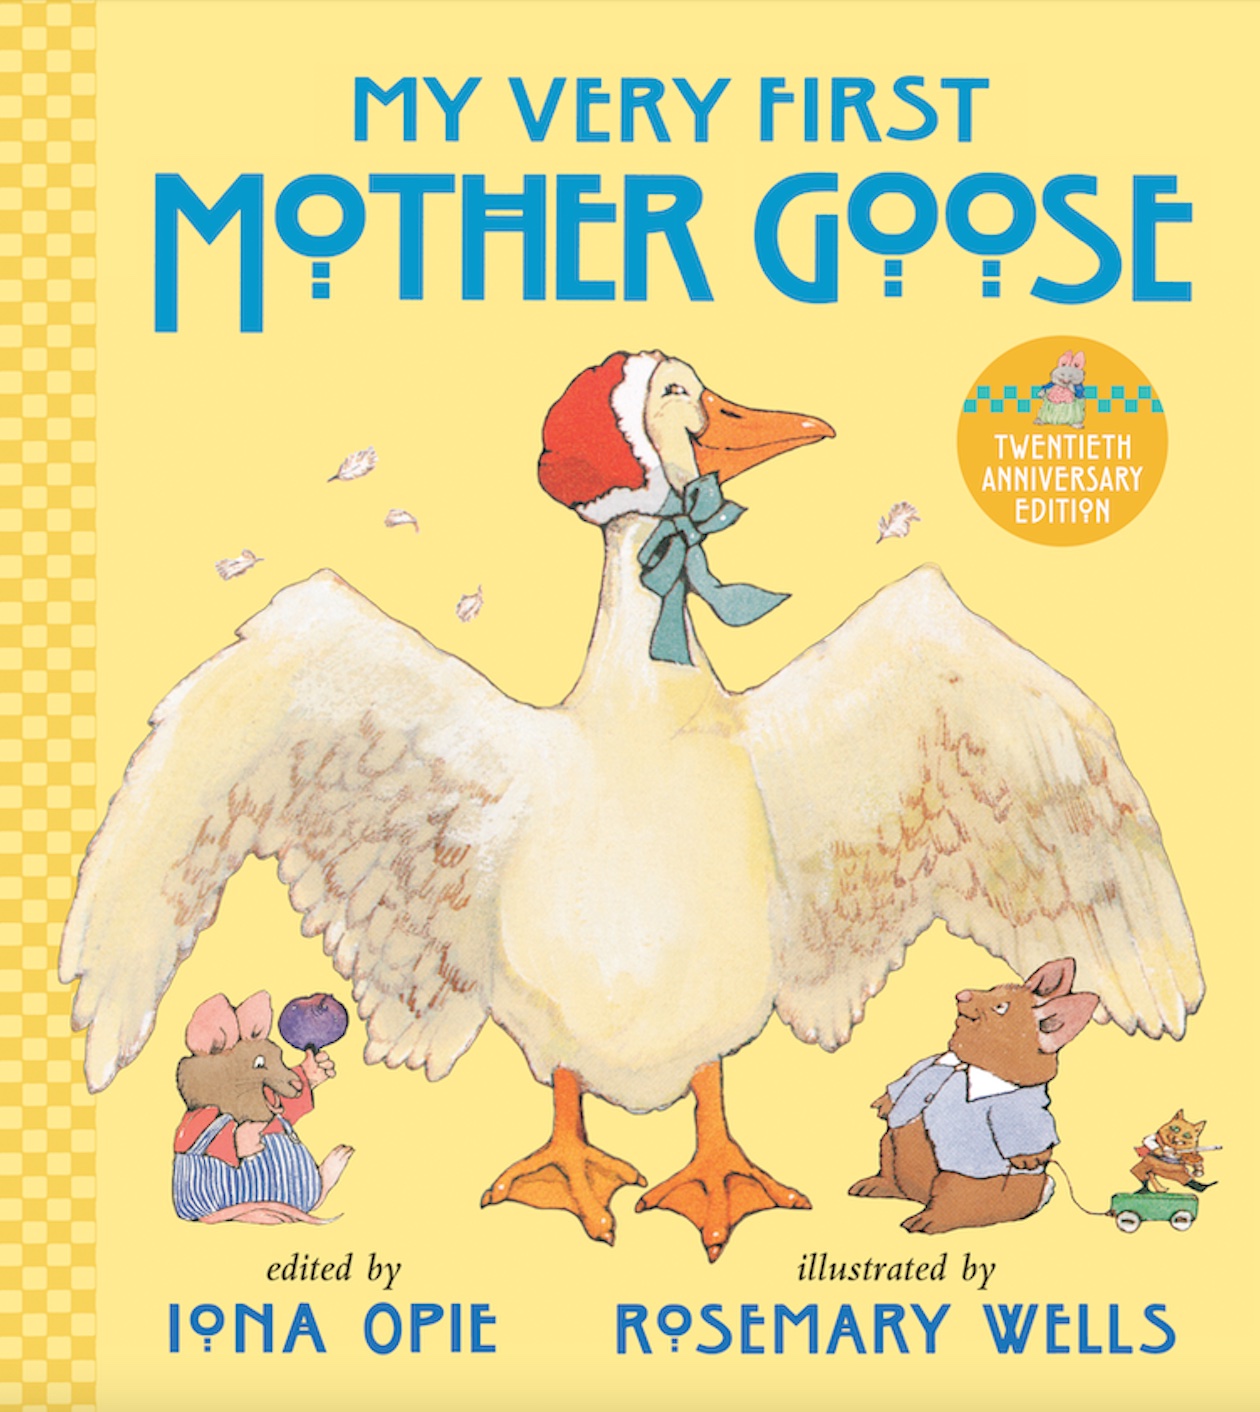 My Very First Mother Goose<br>Edited by Iona Opie